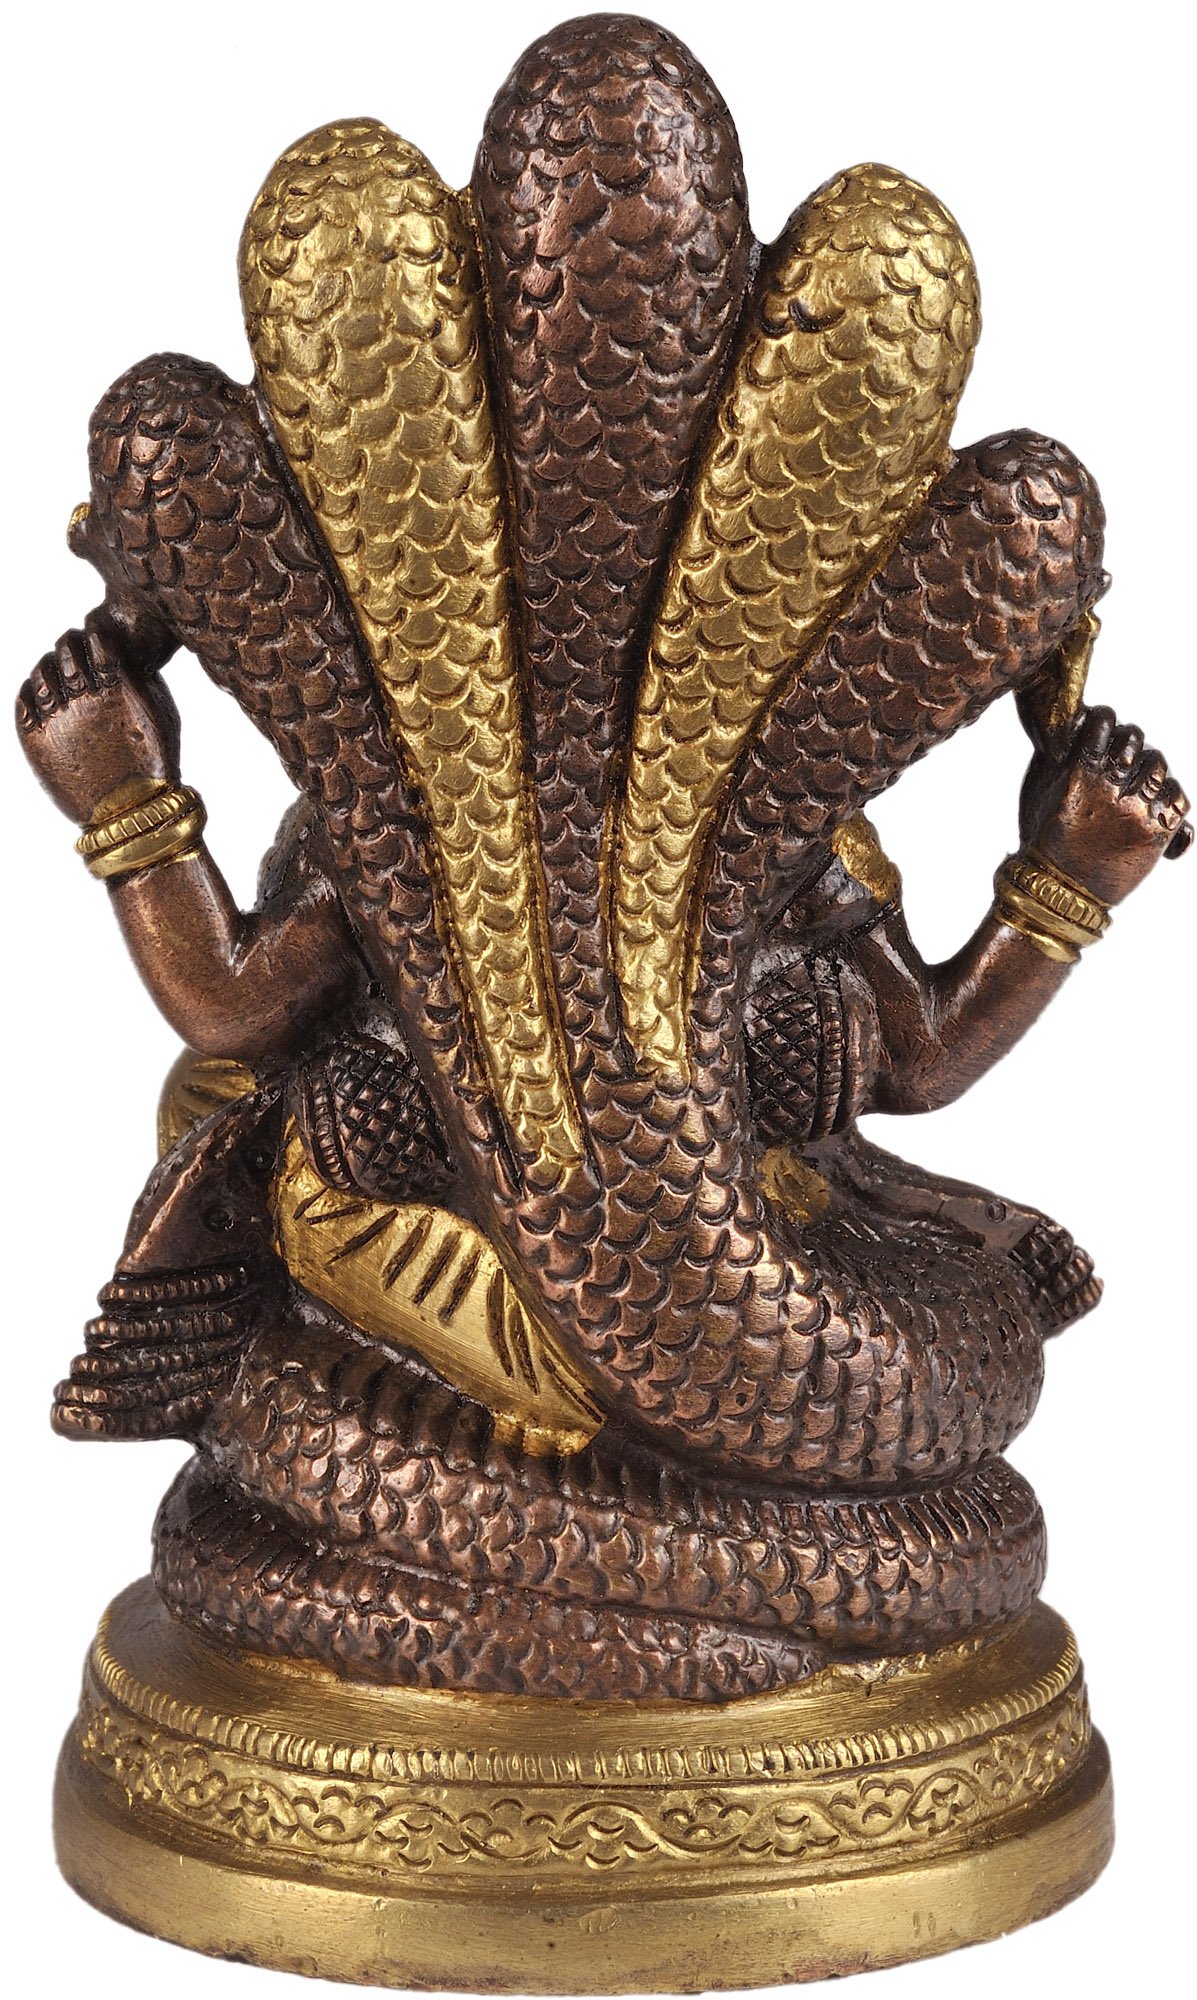 Four-Armed Ganesha Seated on Five-hooded Serpent | Exotic India Art